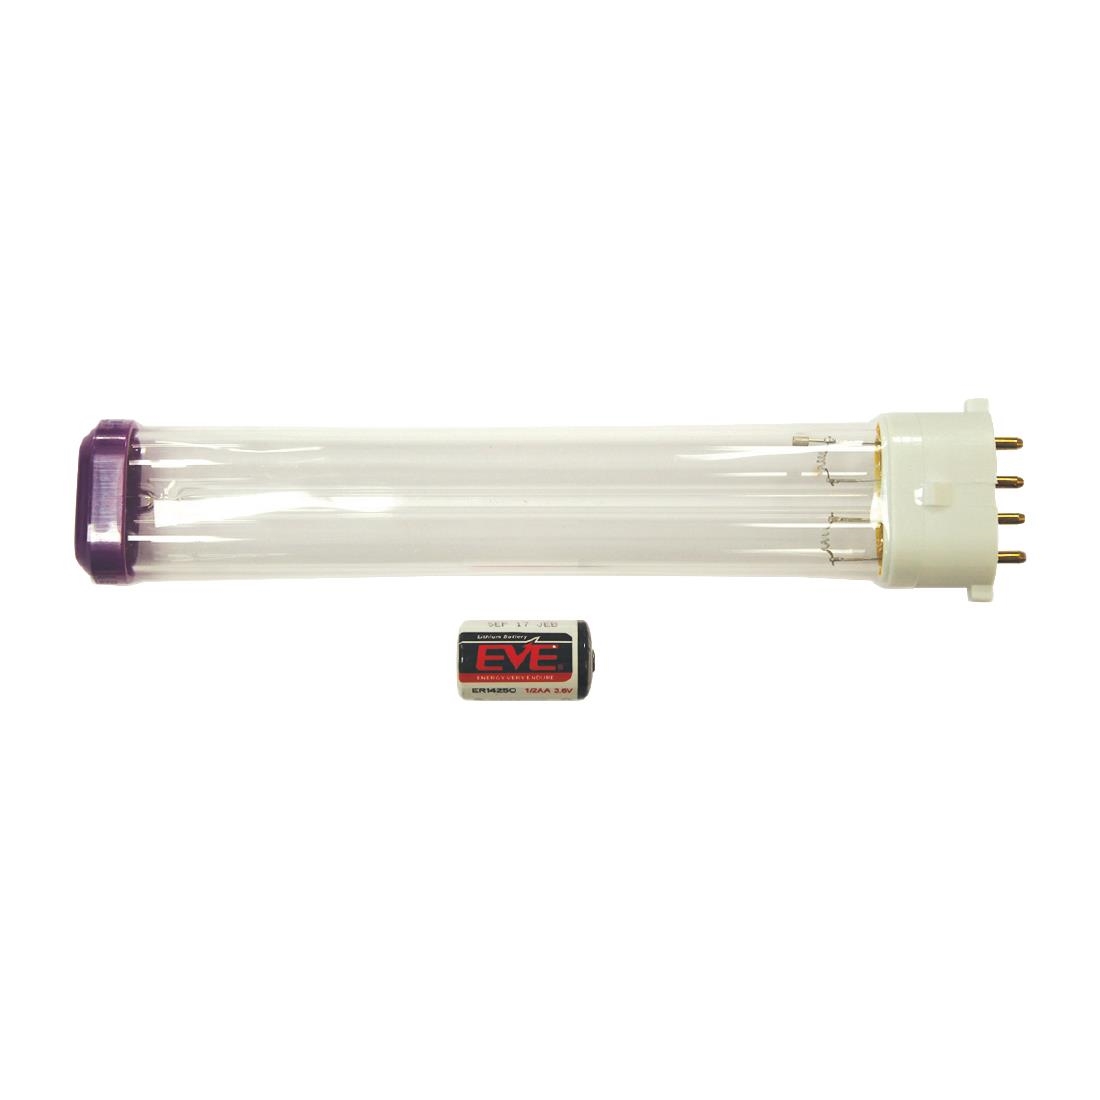 HyGenikx System Shatter-proof Replacement Lamp and Battery Purple Cap HGX-30-F